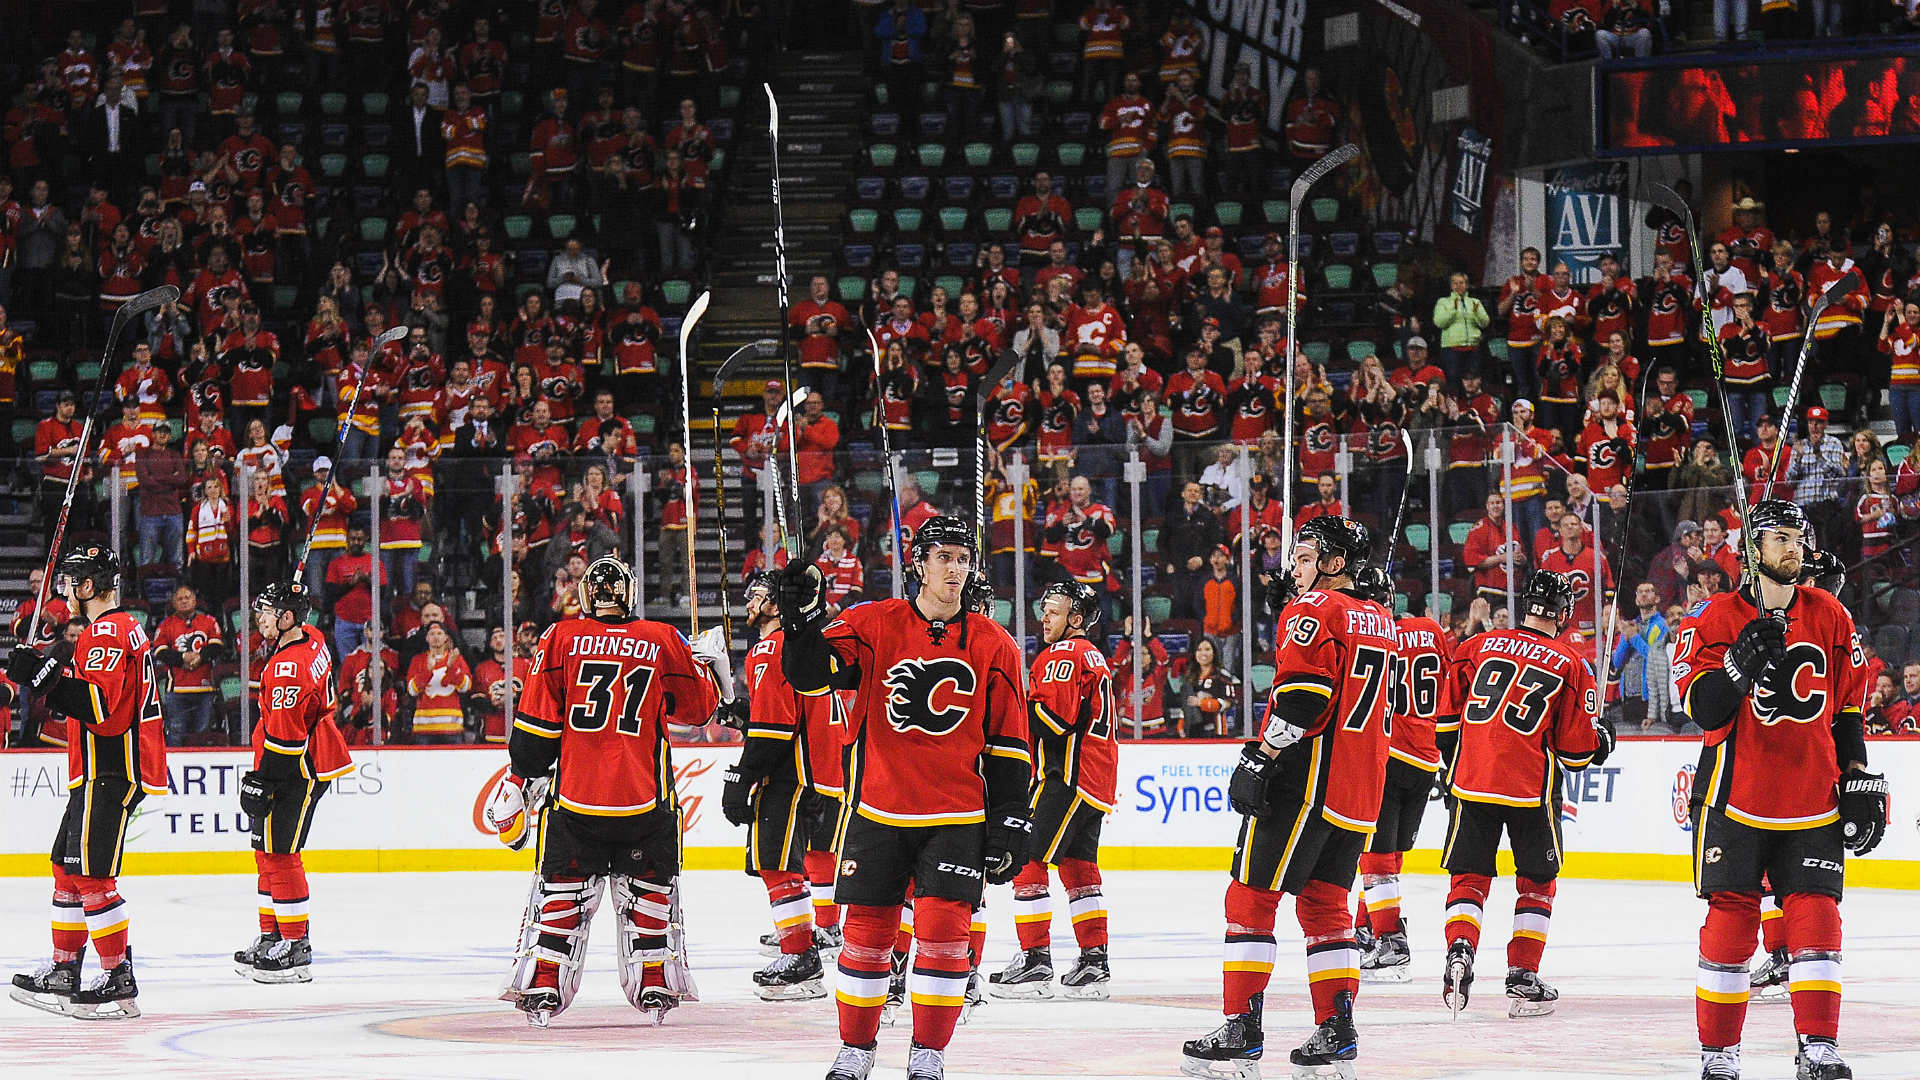 Flames executive says team will leave Calgary without new arena | NHL